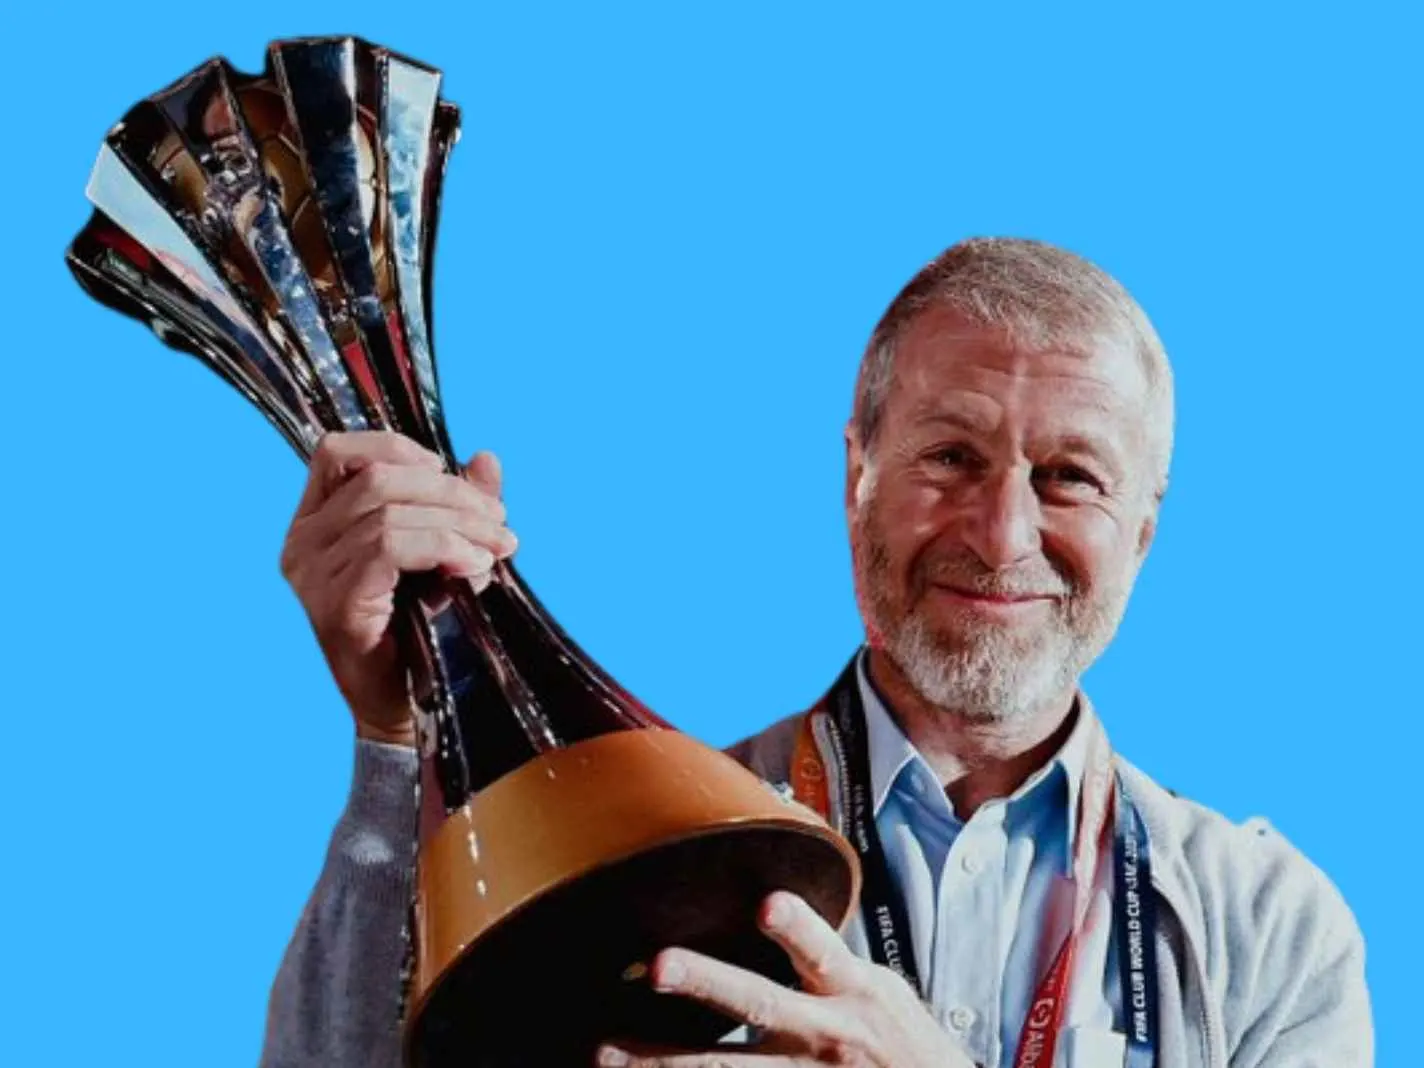 Chelsea owner Roman Abramovich holding a trophy